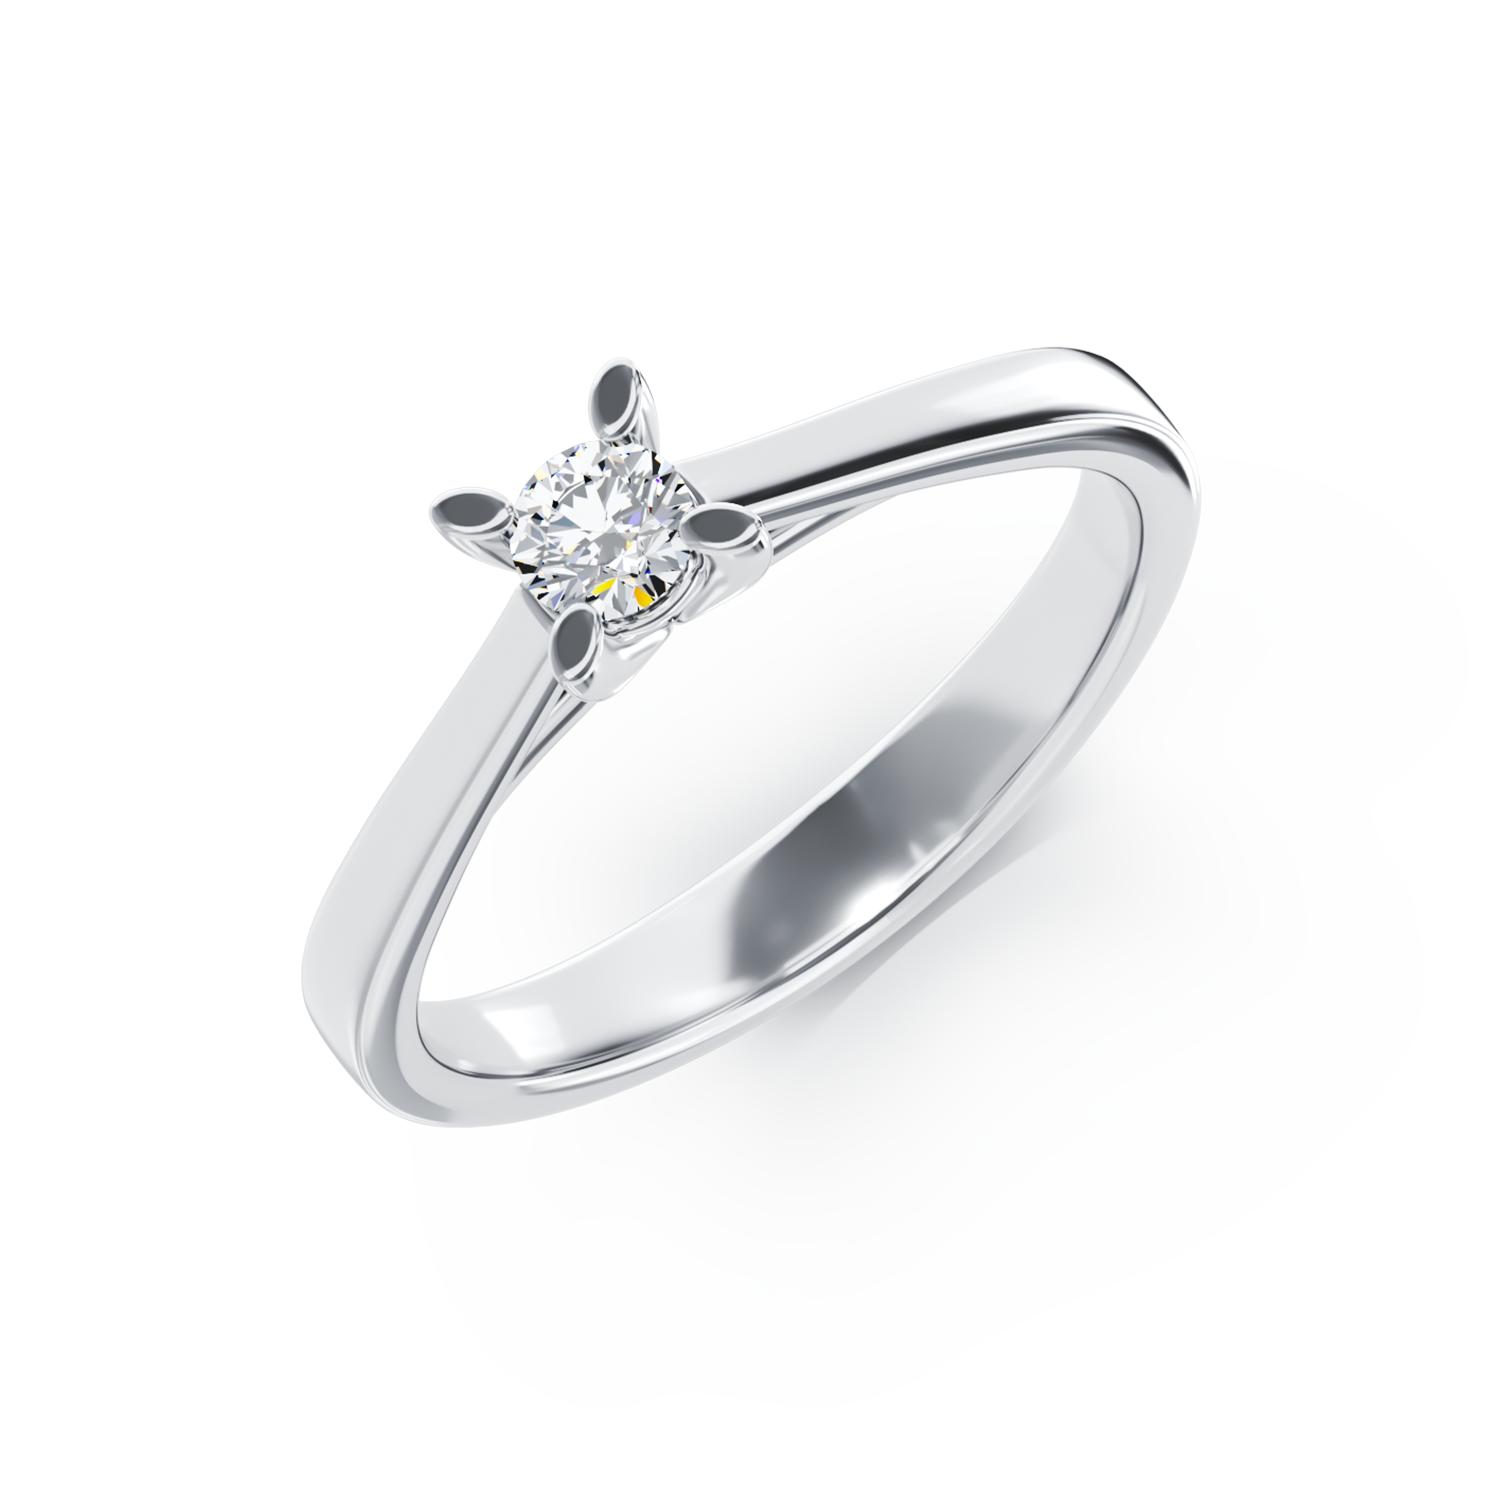 18K white gold engagement ring with a 0.1ct solitaire diamond